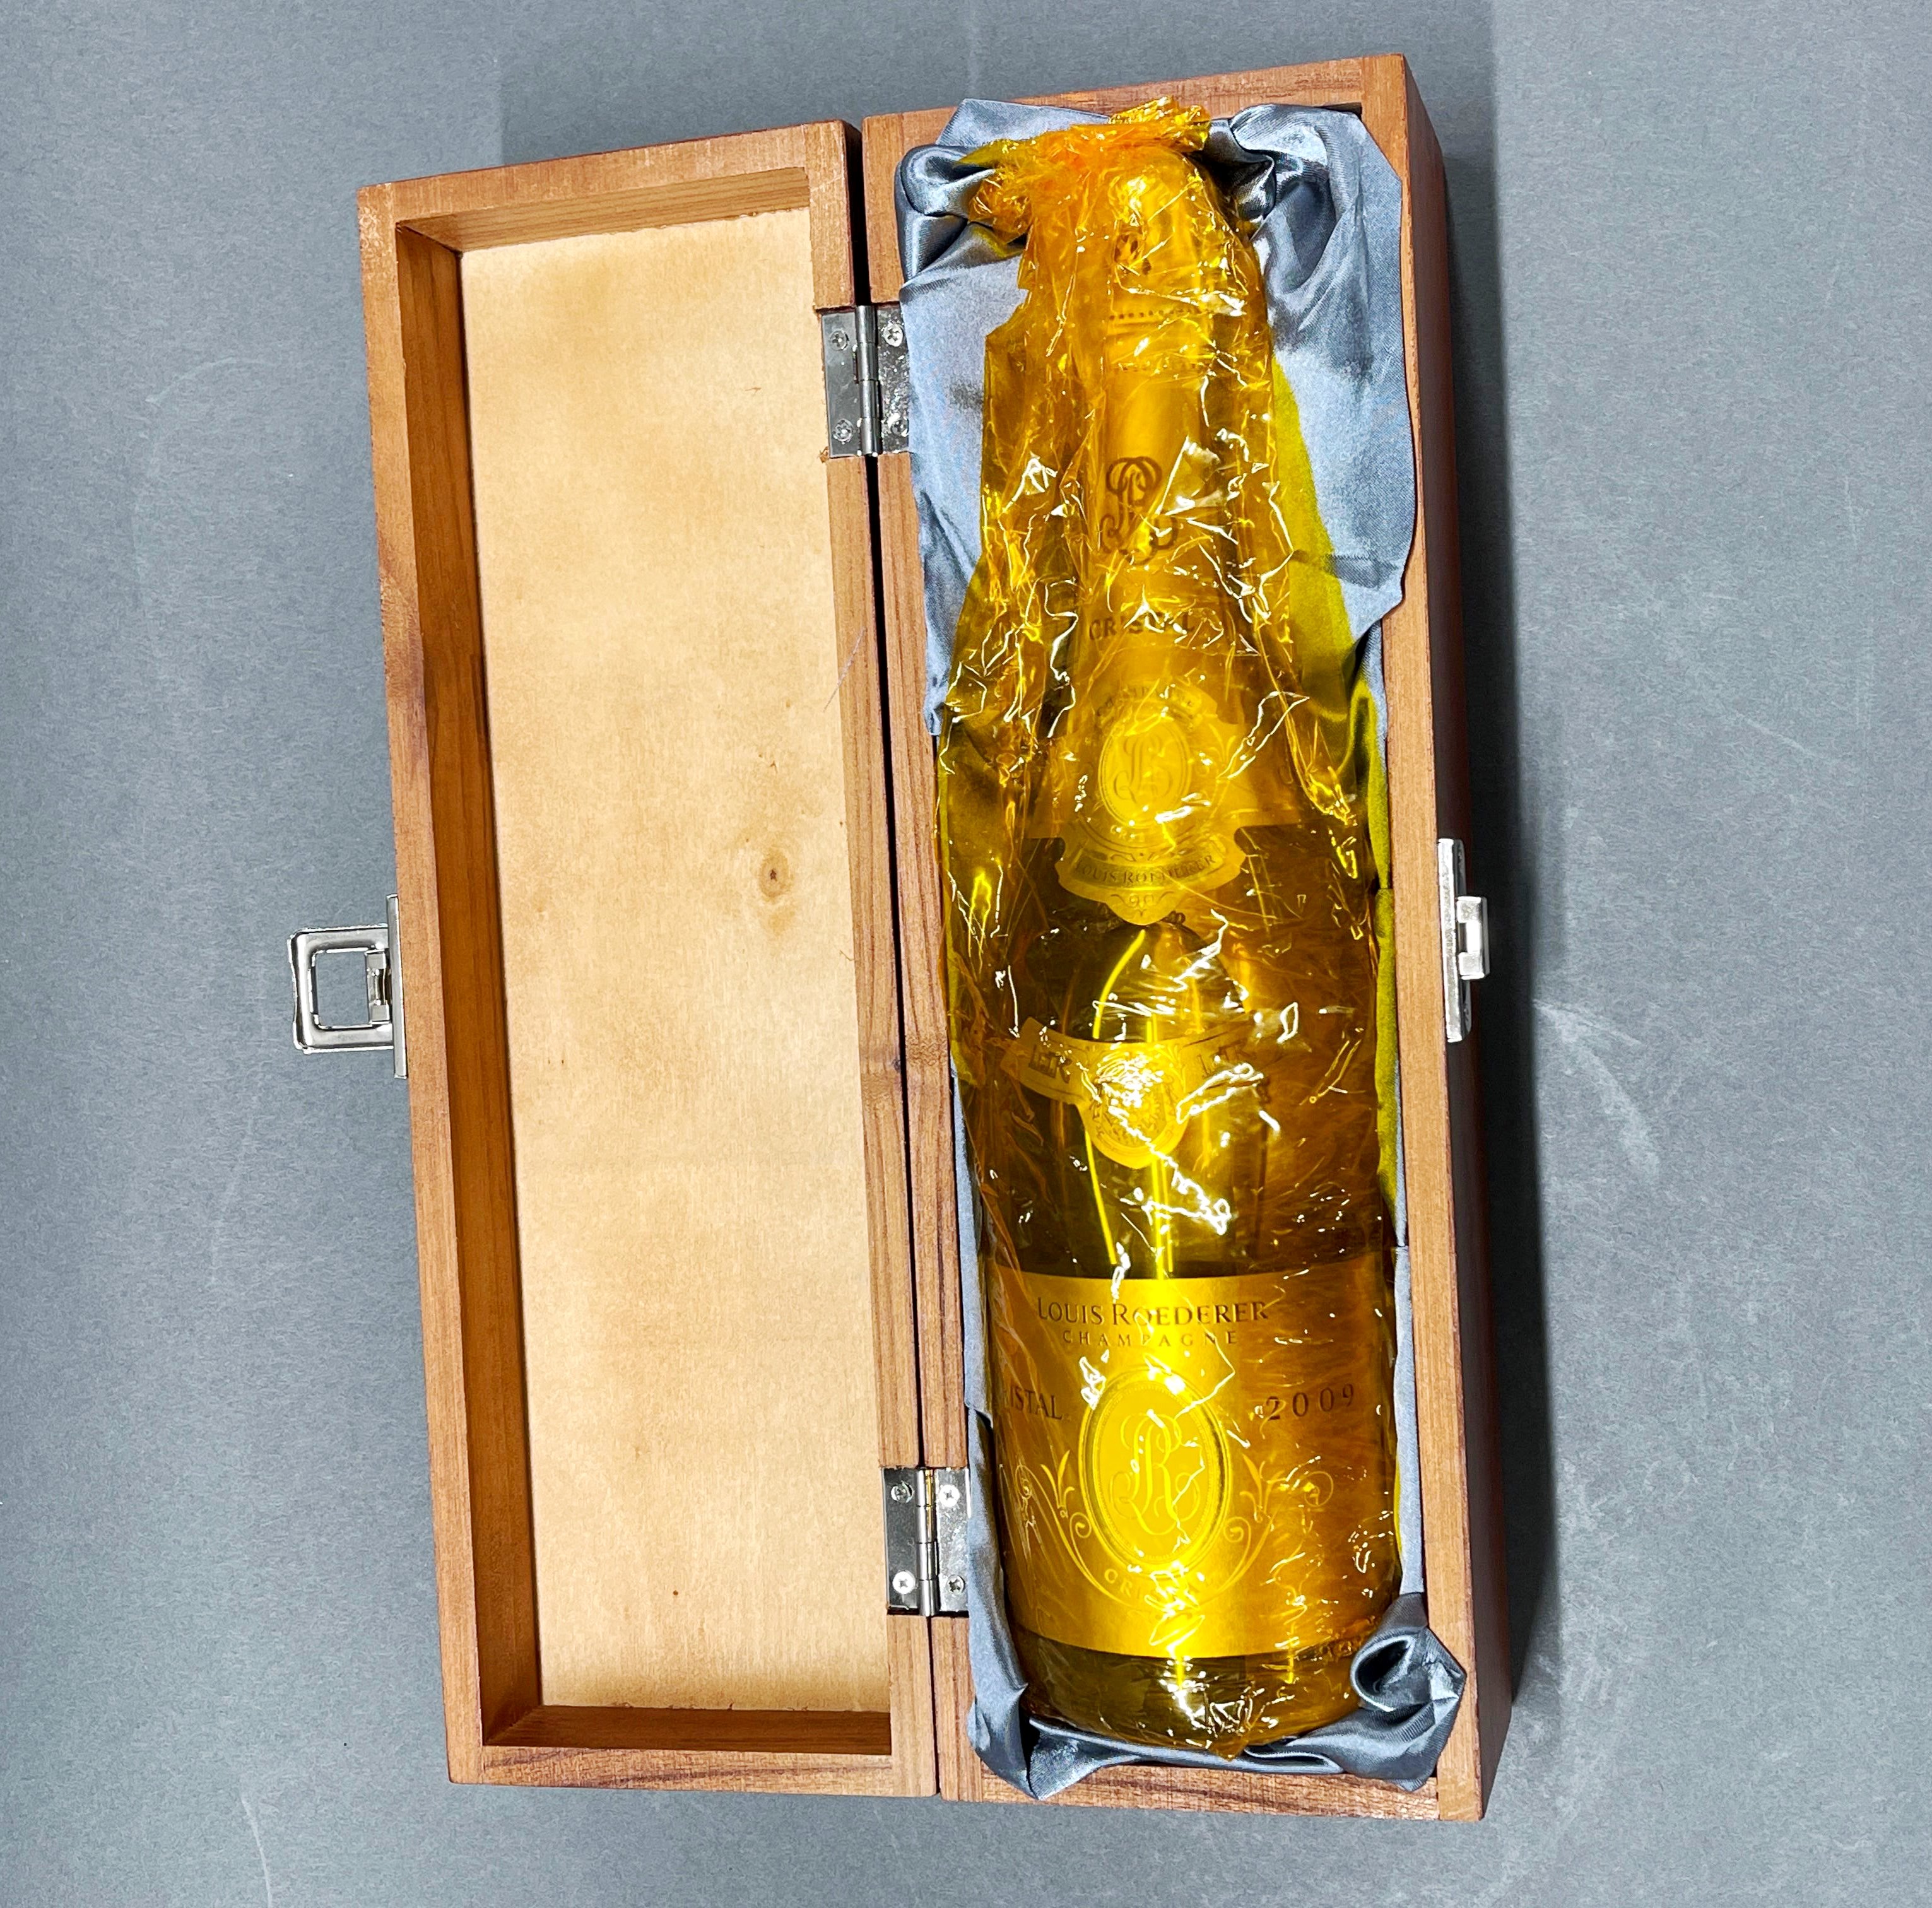 A boxed Louis Roederer 2009 crystale champagne. - Image 2 of 2